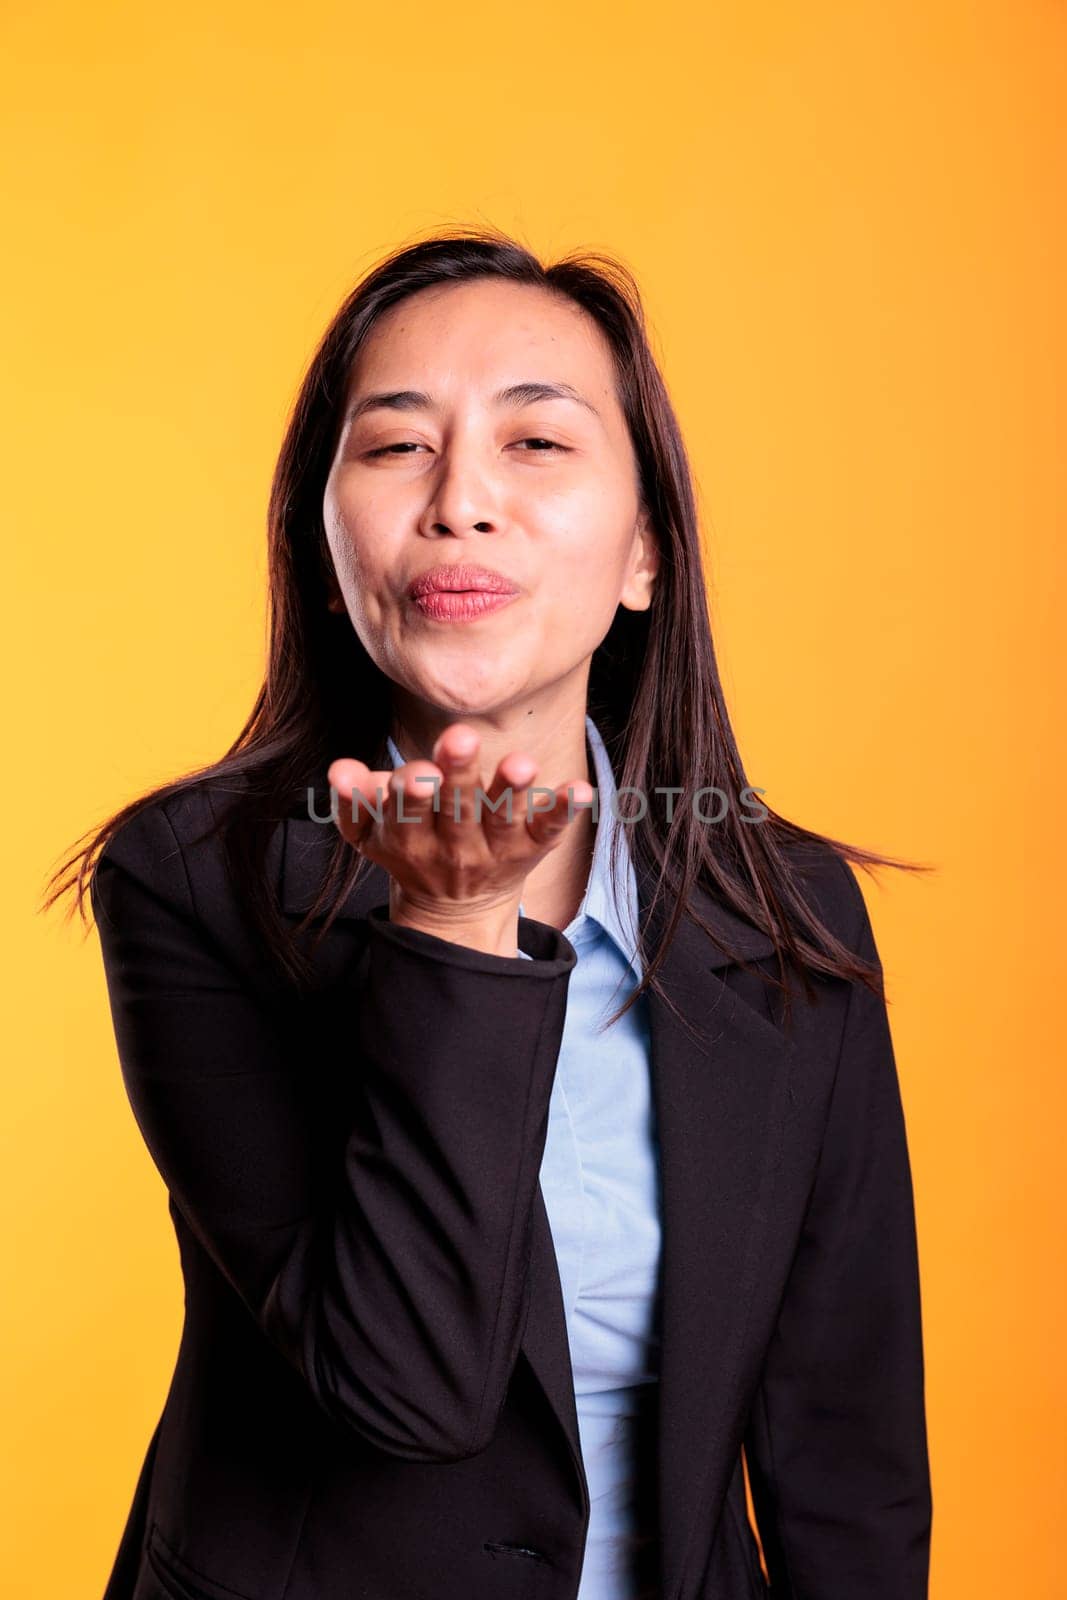 Attractive asian model blowing air kissed during studio shot, posing over yellow background. Confident carefree woman expressing love, looking at the camera with a satisfied smile. Romantic gesture